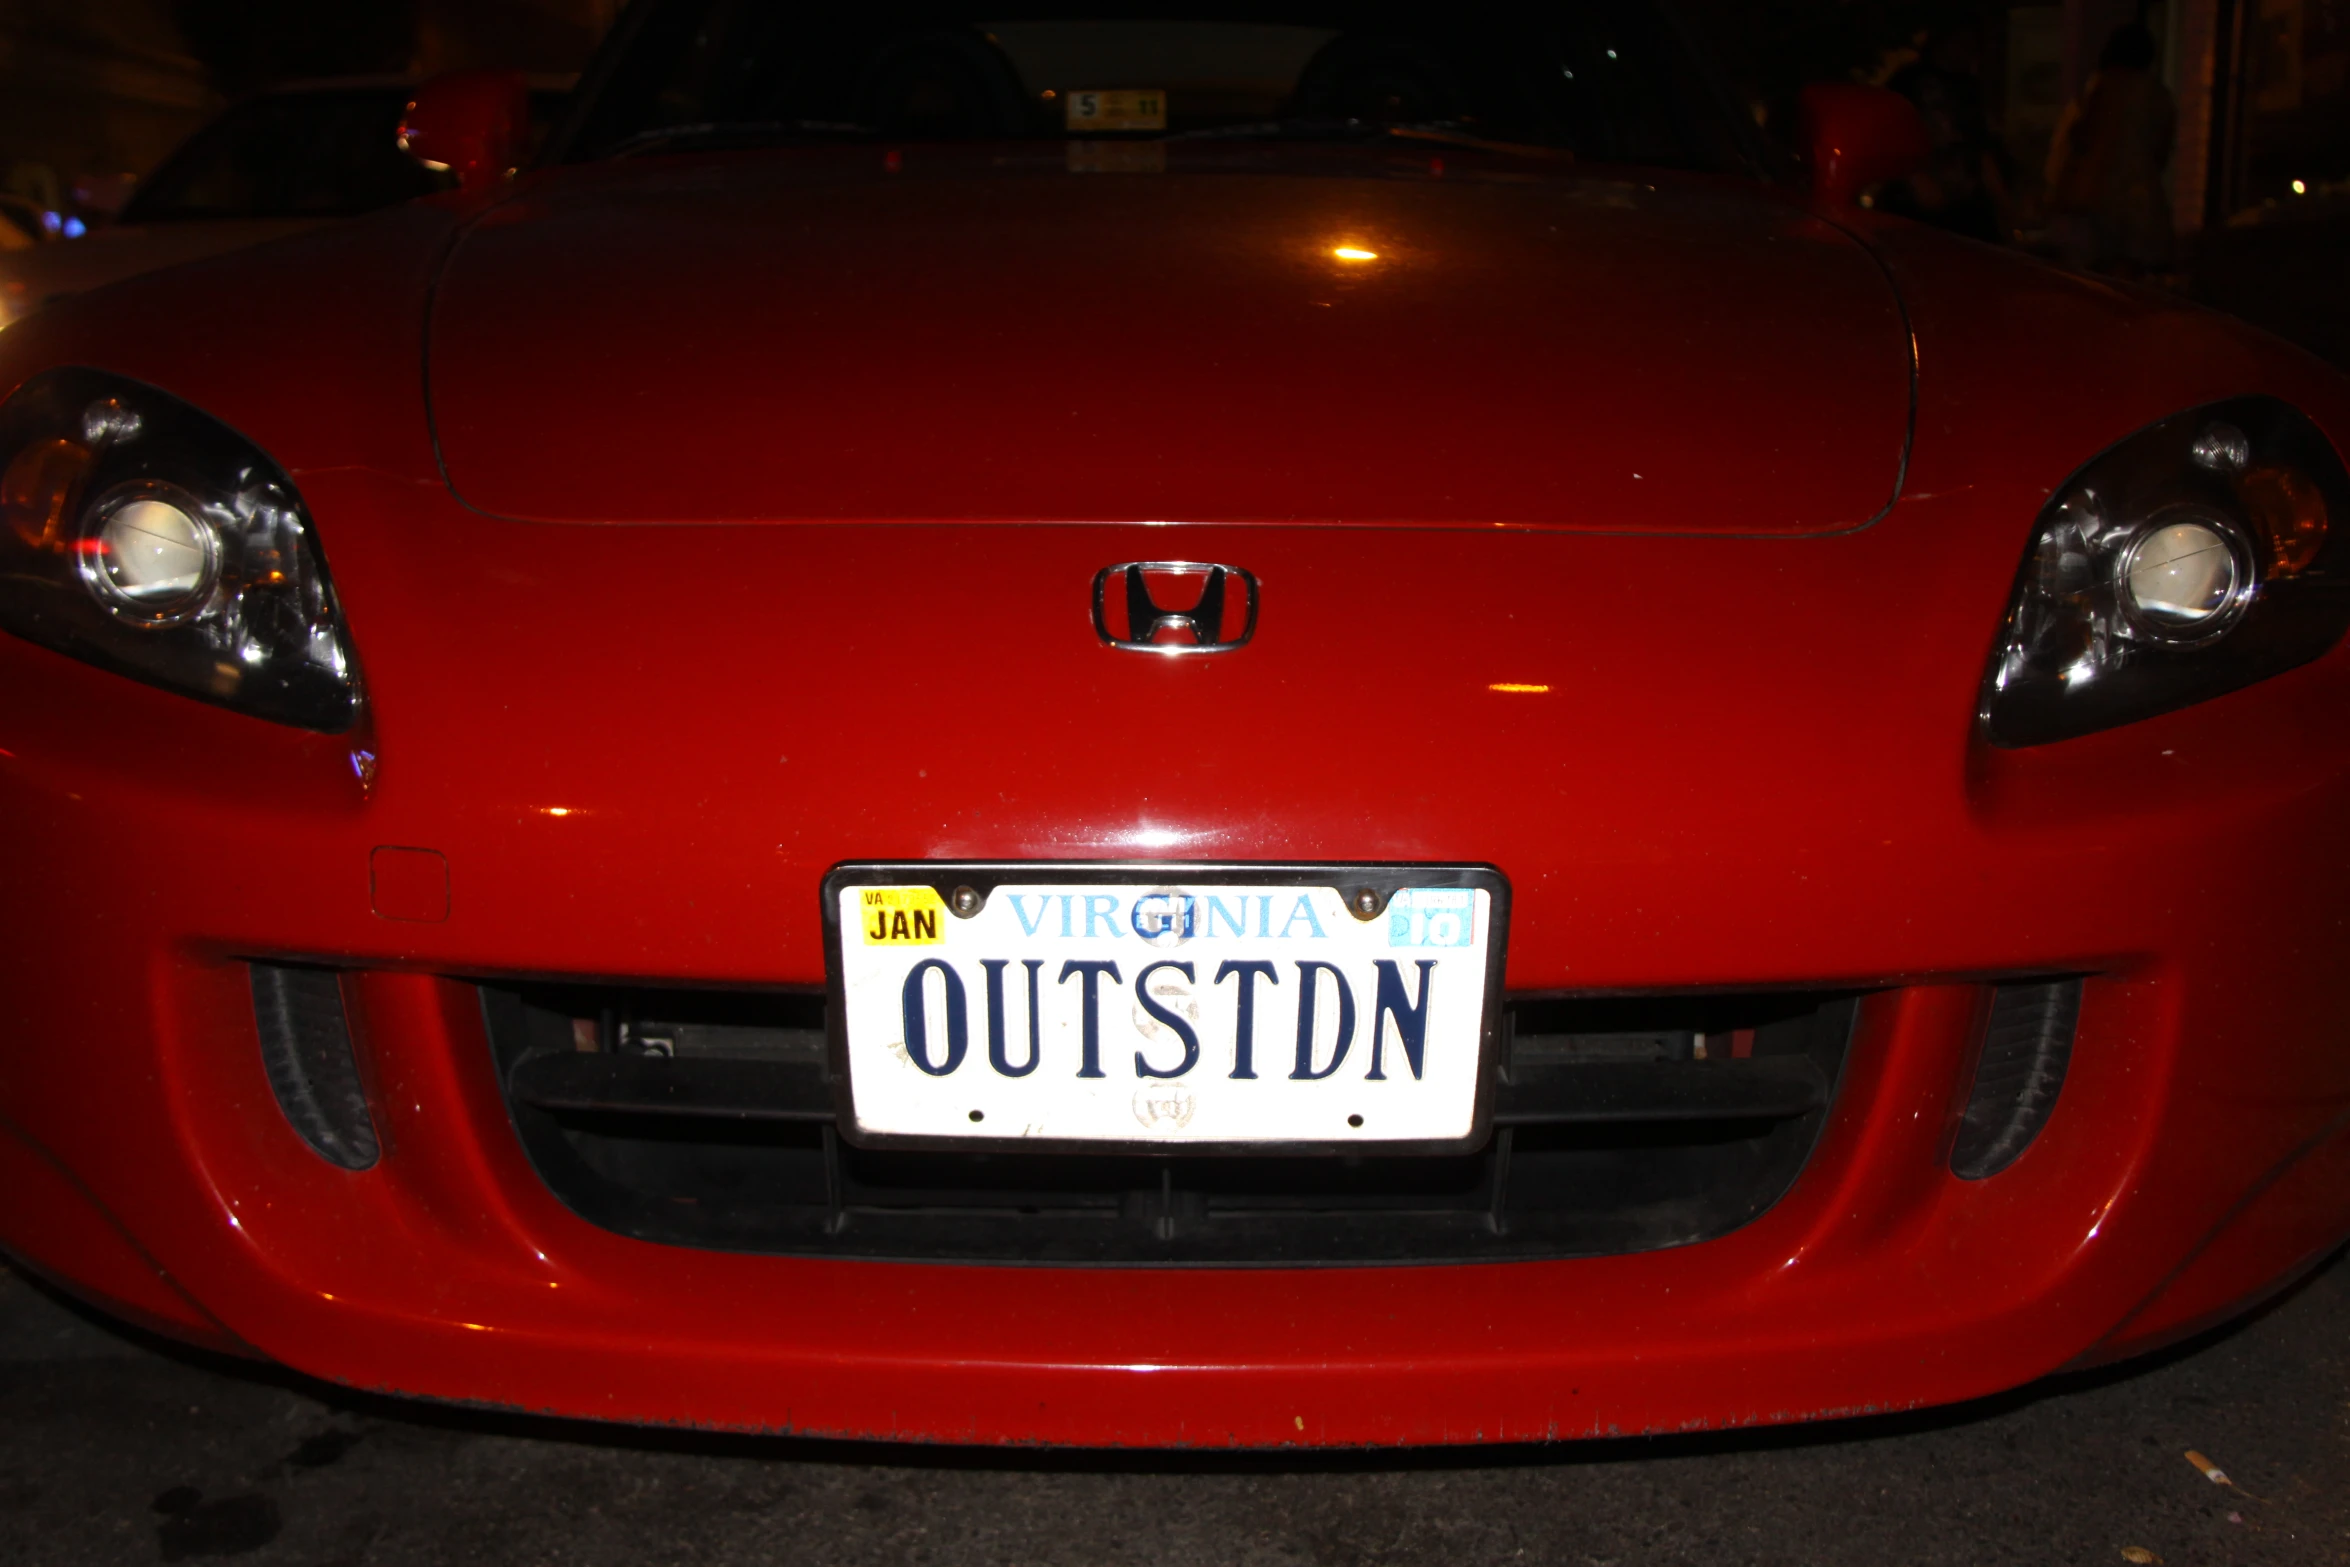 a license plate attached to a red car